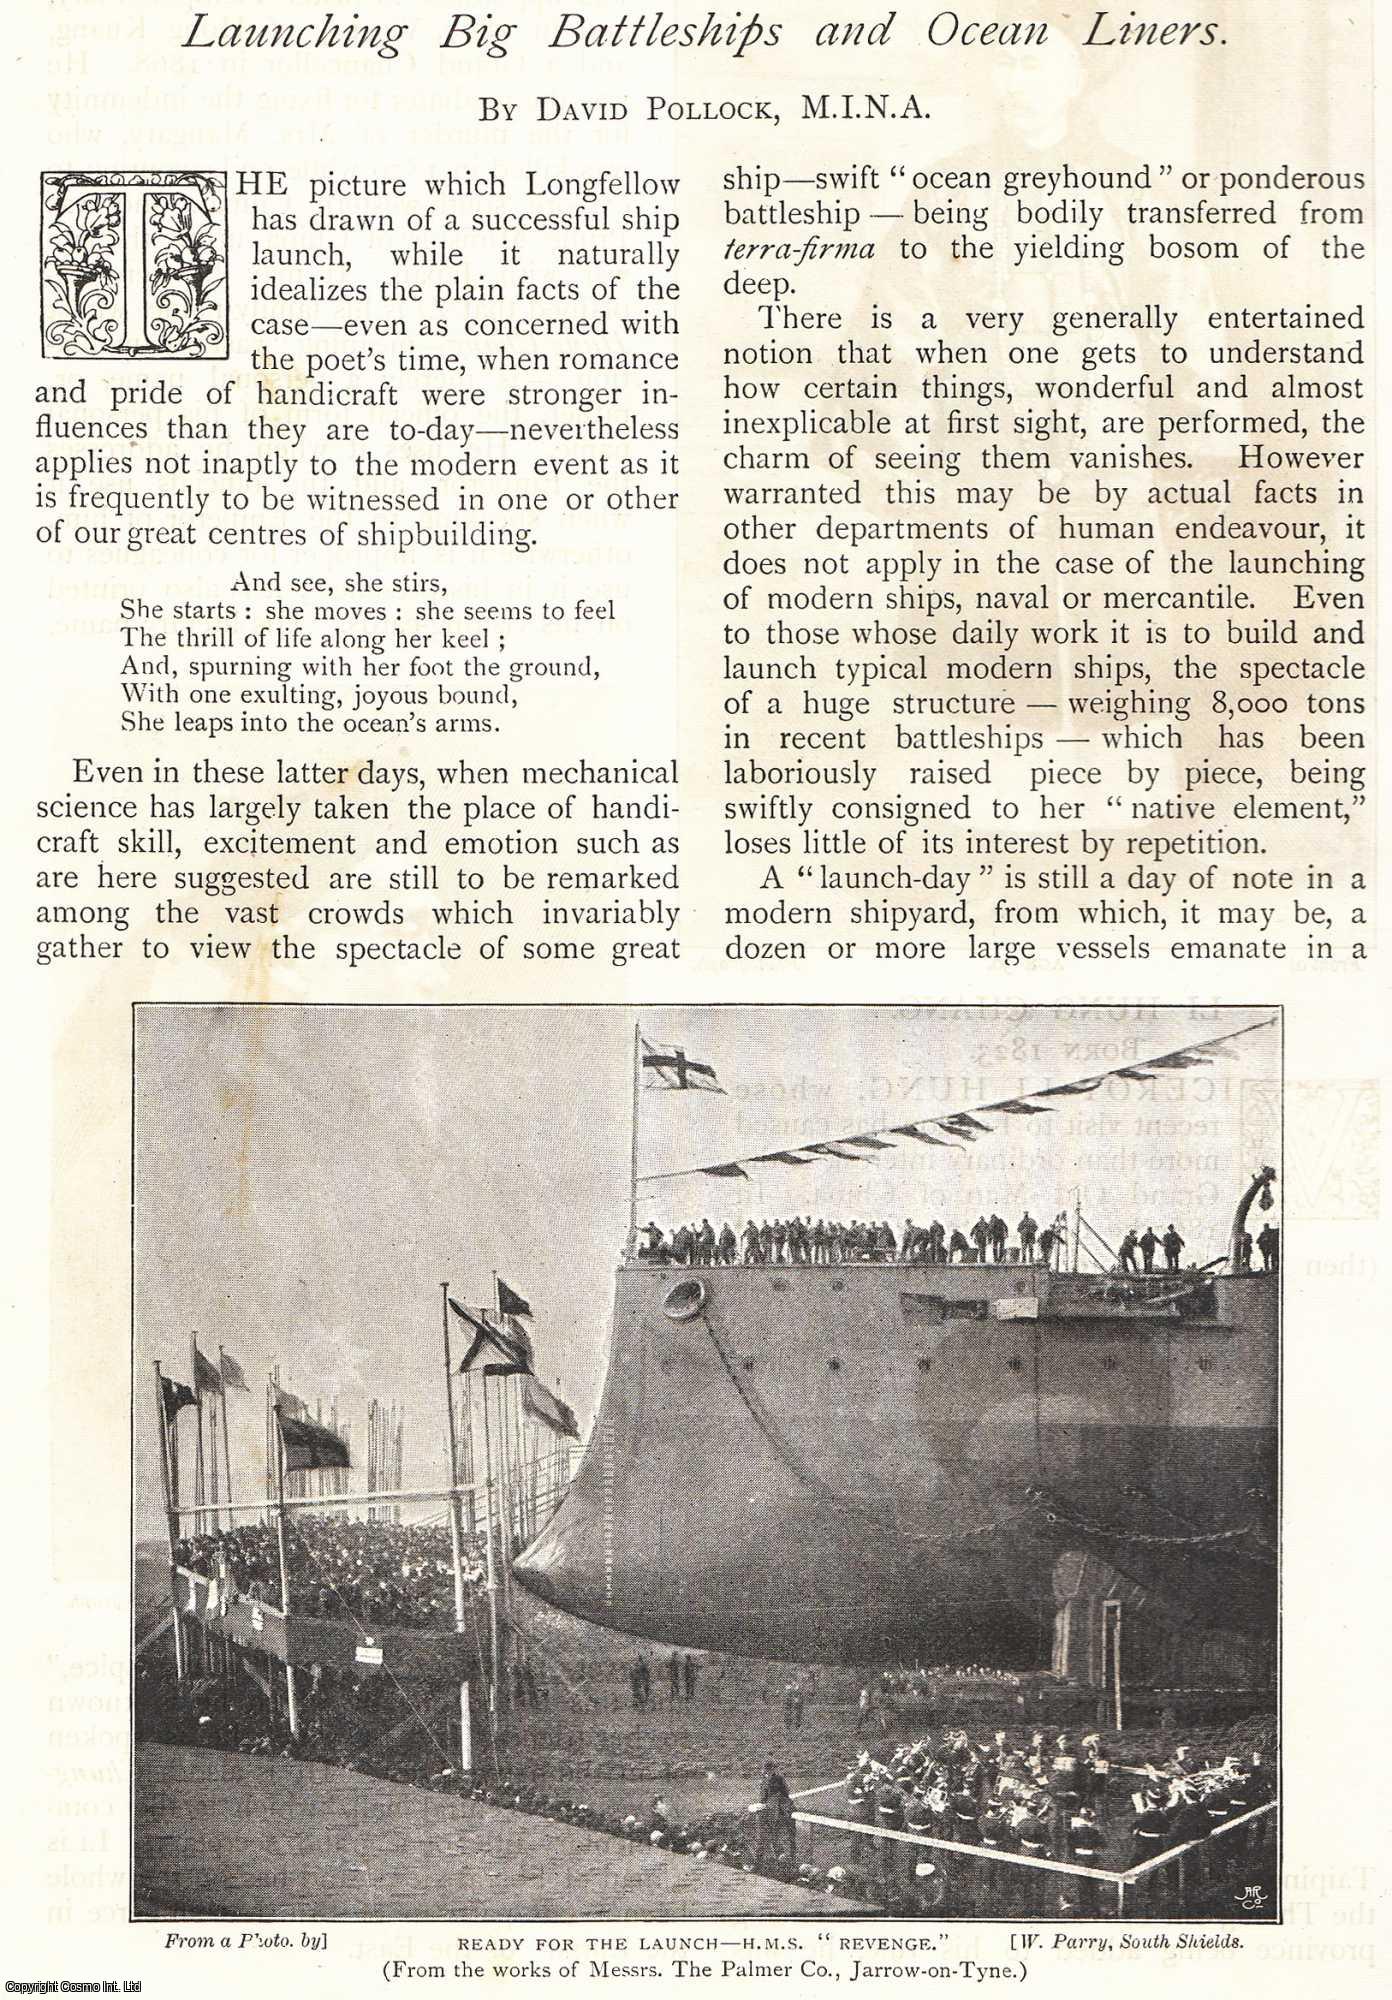 David Pollock - H.M.S. Victoria ; The Campania ; The Harlech Castle ; St. Louis & others : Launching Big Battleships and Ocean Liners. An uncommon original article from The Strand Magazine, 1896.